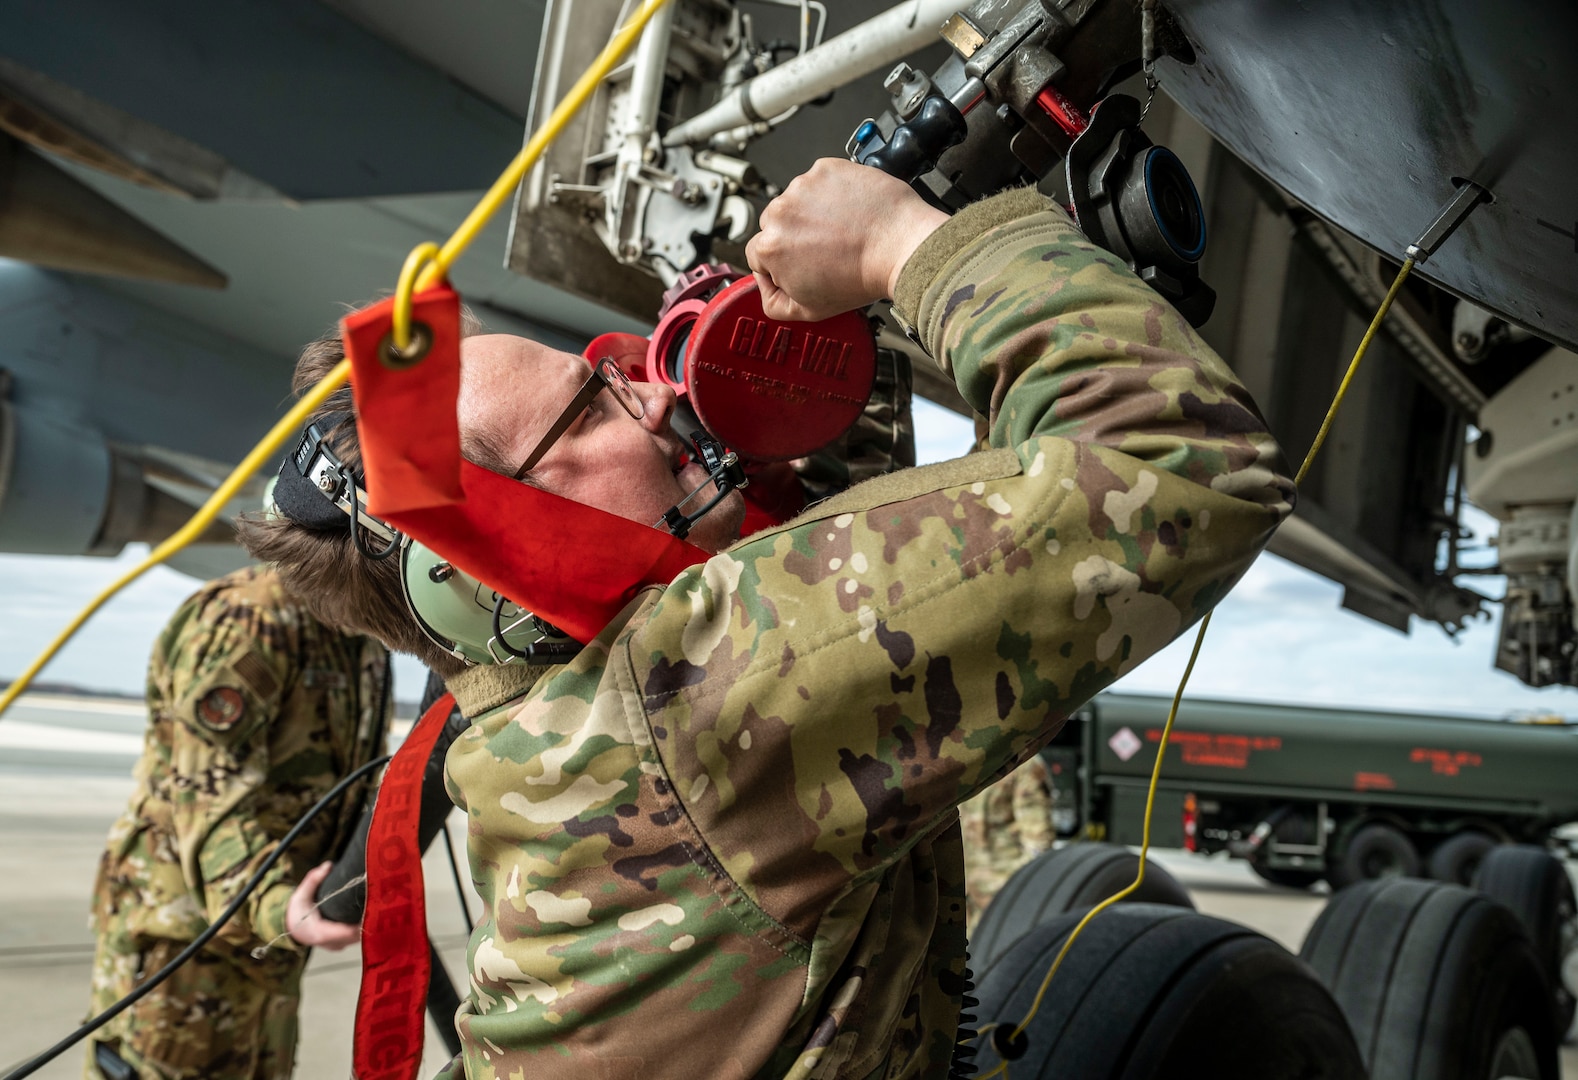 Staff Sgt. Kyle Hewitt, 9th Airlift Squadron flight engineer, attaches a fuel hose from an R-11 Refueler to a C-5M Super Galaxy during a wet wing defuel at Dover Air Force Base, Delaware, March 1, 2023. Aircrew with the 9th AS test out new capabilities that allow the C-5 to act as a mobile fuel station and deposit fuel from the aircraft fuel tanks, into tankers standing by. (U.S. Air Force photo by Staff Sgt. Marco A. Gomez)